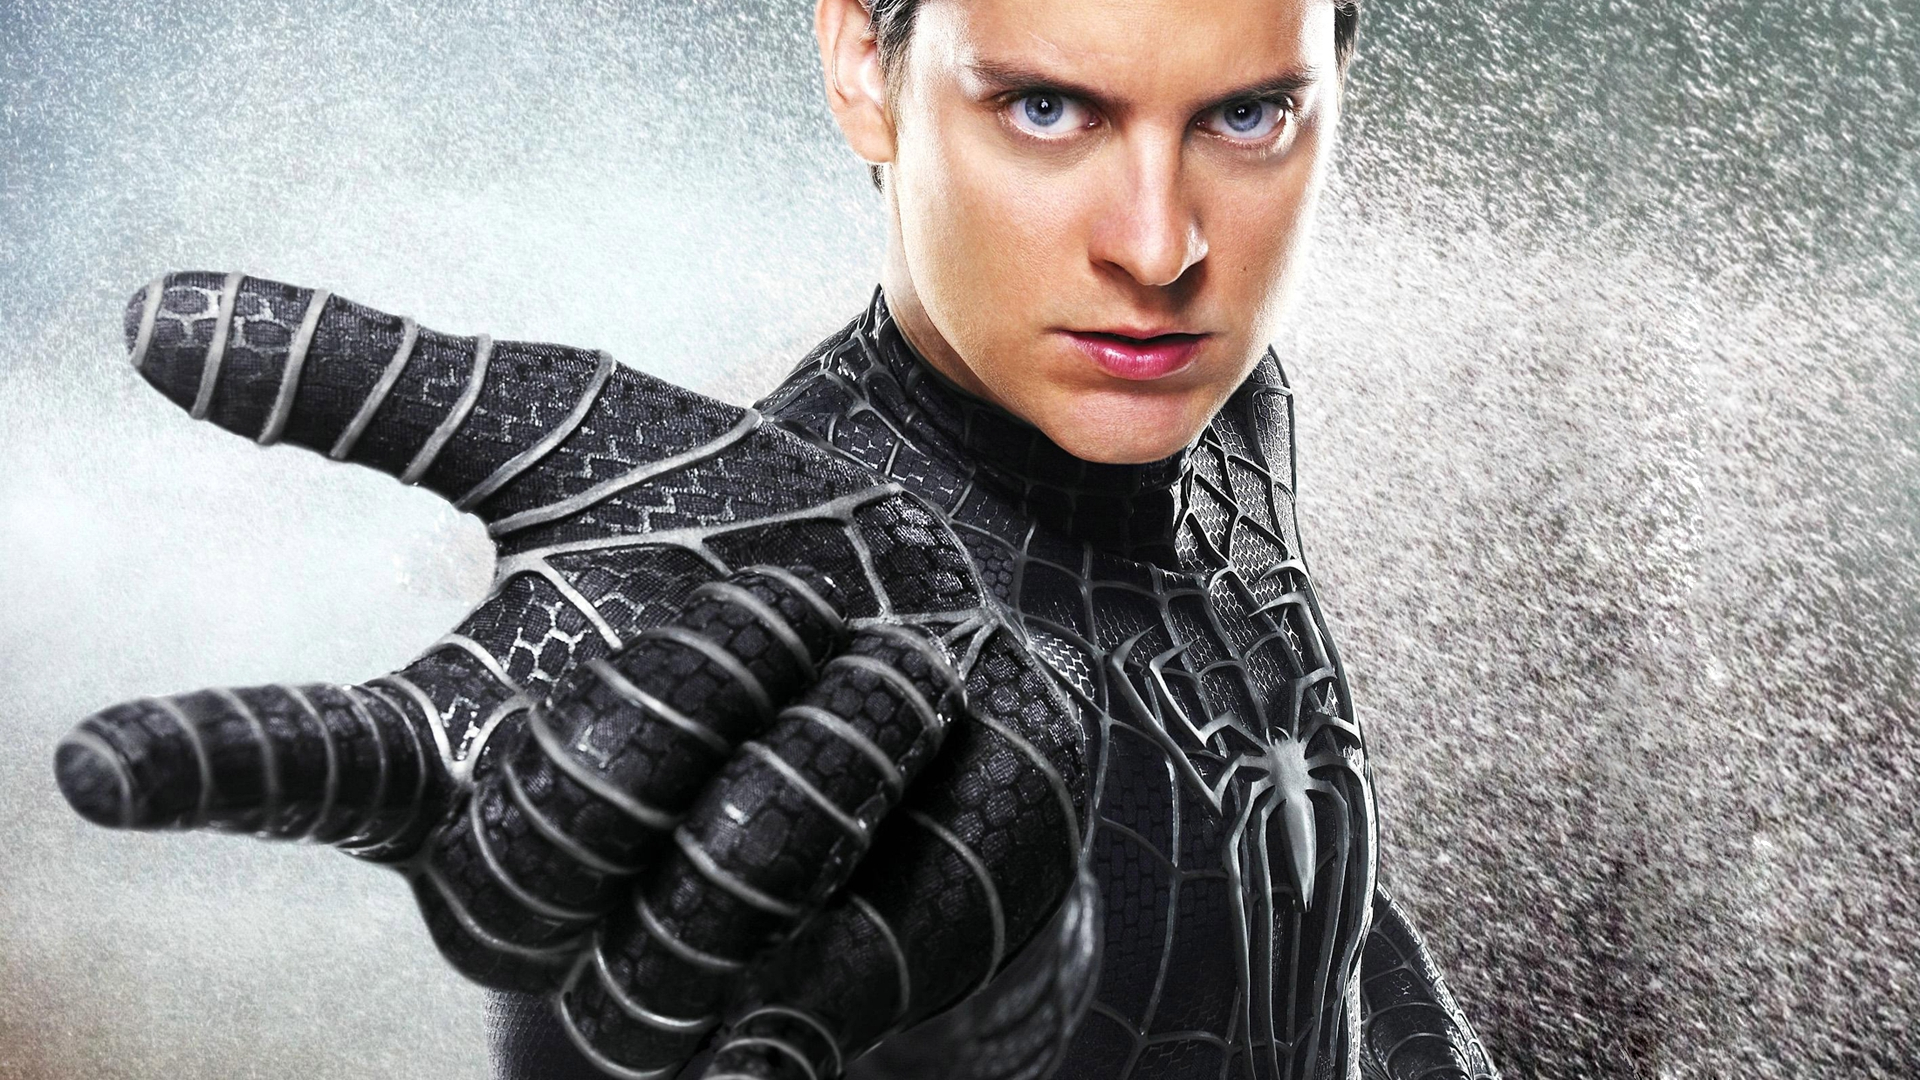 Exclusive: Tobey Maguire's Spider-Man 4 Is Actually In The Works